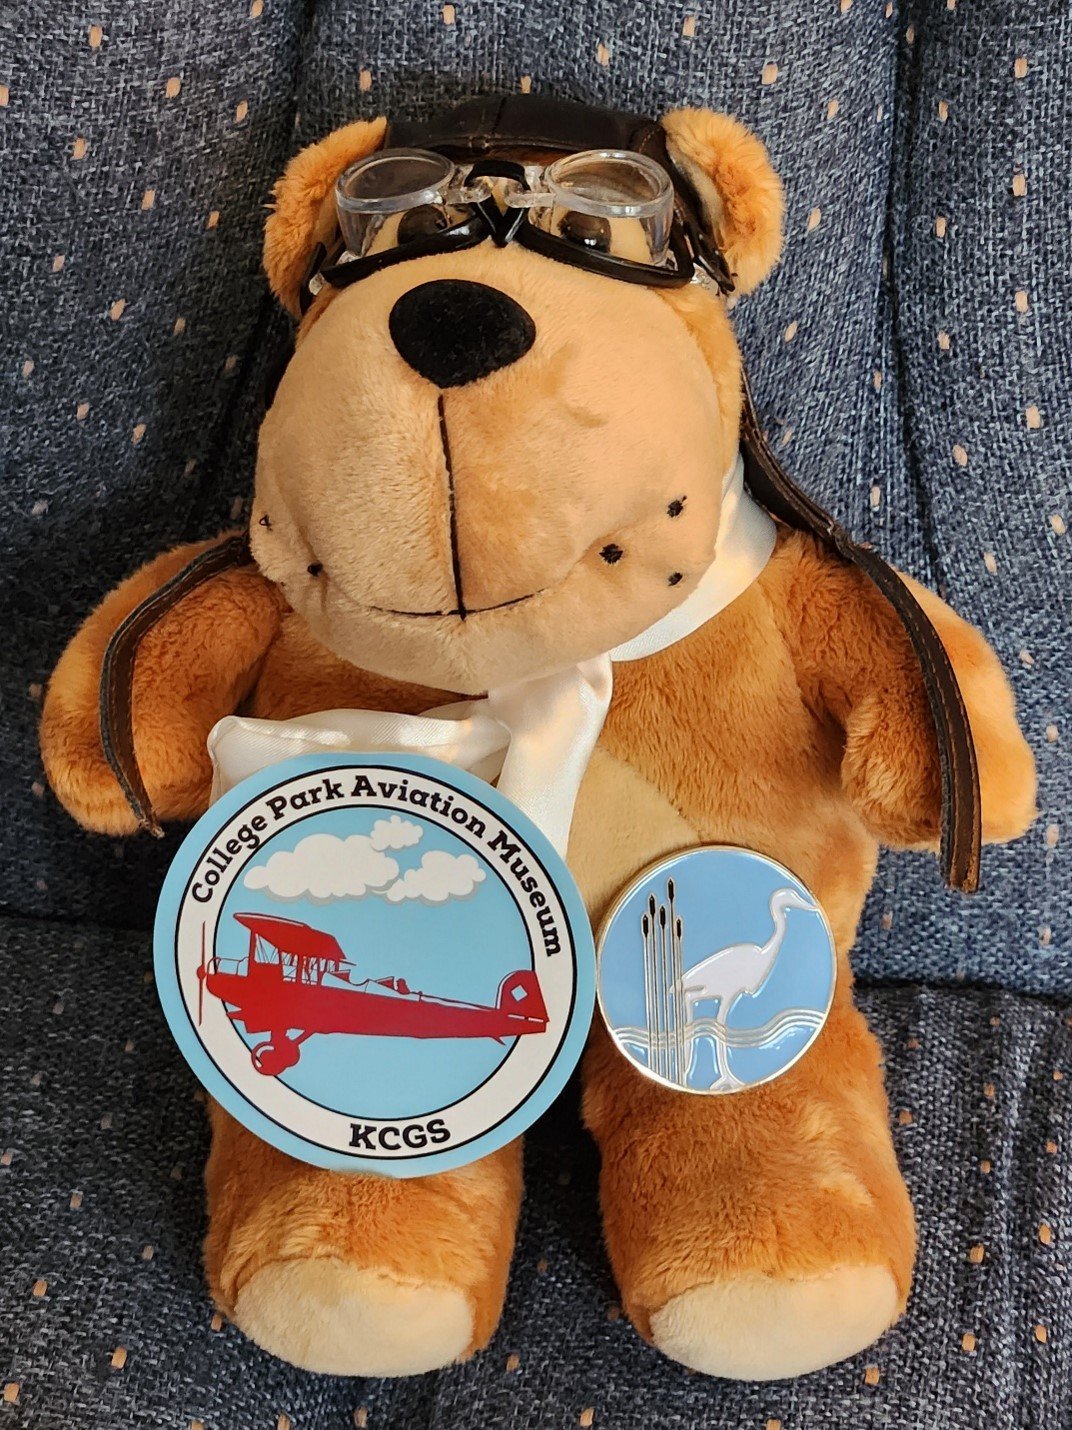 “The Aviator” with his museum sticker and the Chesapeake Chapter coin, one of which was given to Samantha Ferris at the end of the event.